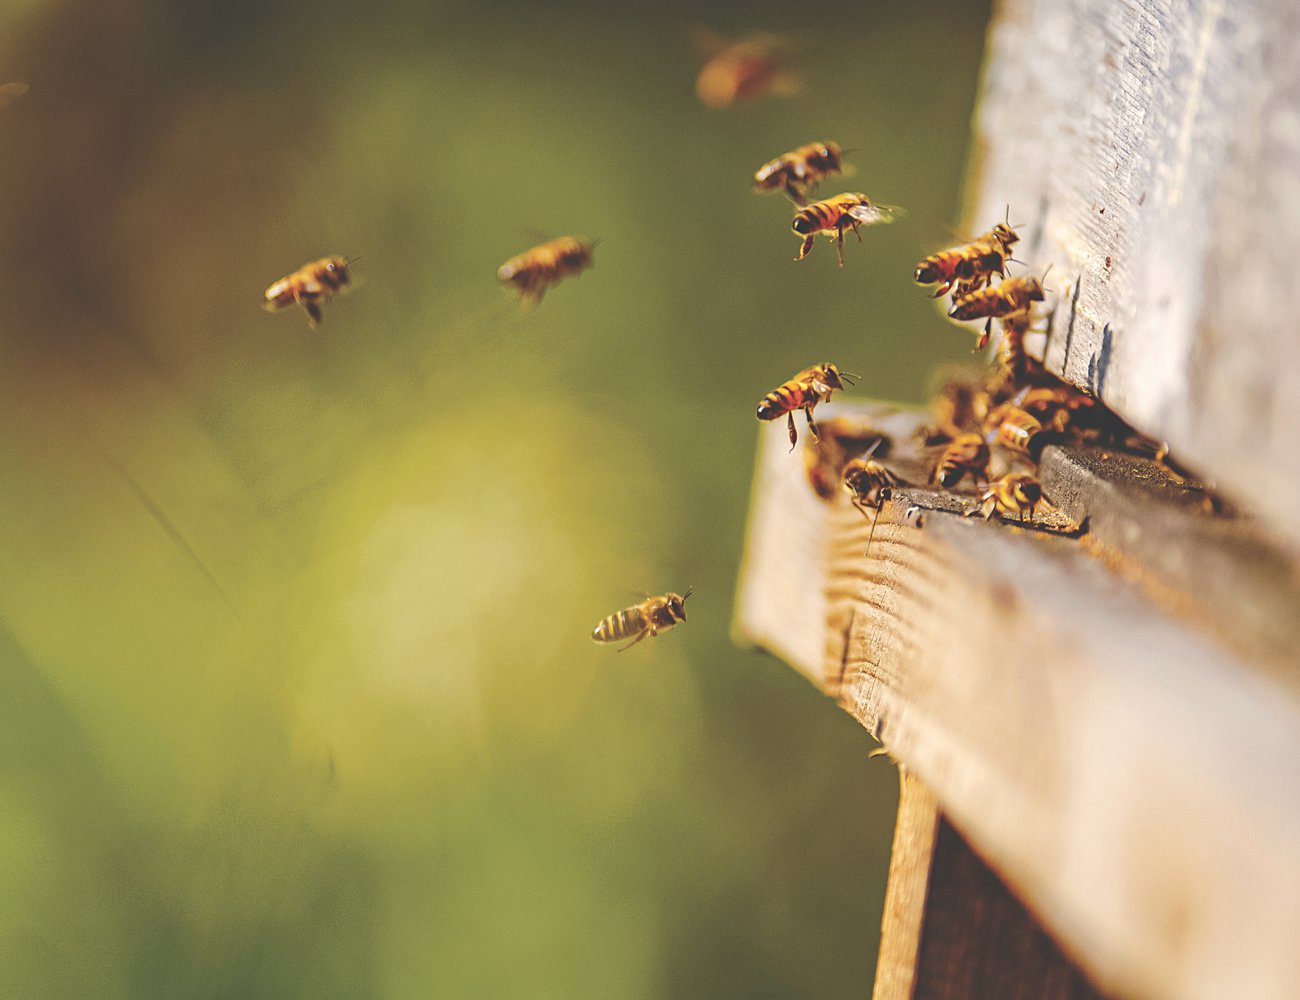 Hall Hunter uses sustainable farming practices such as wild bee pollination